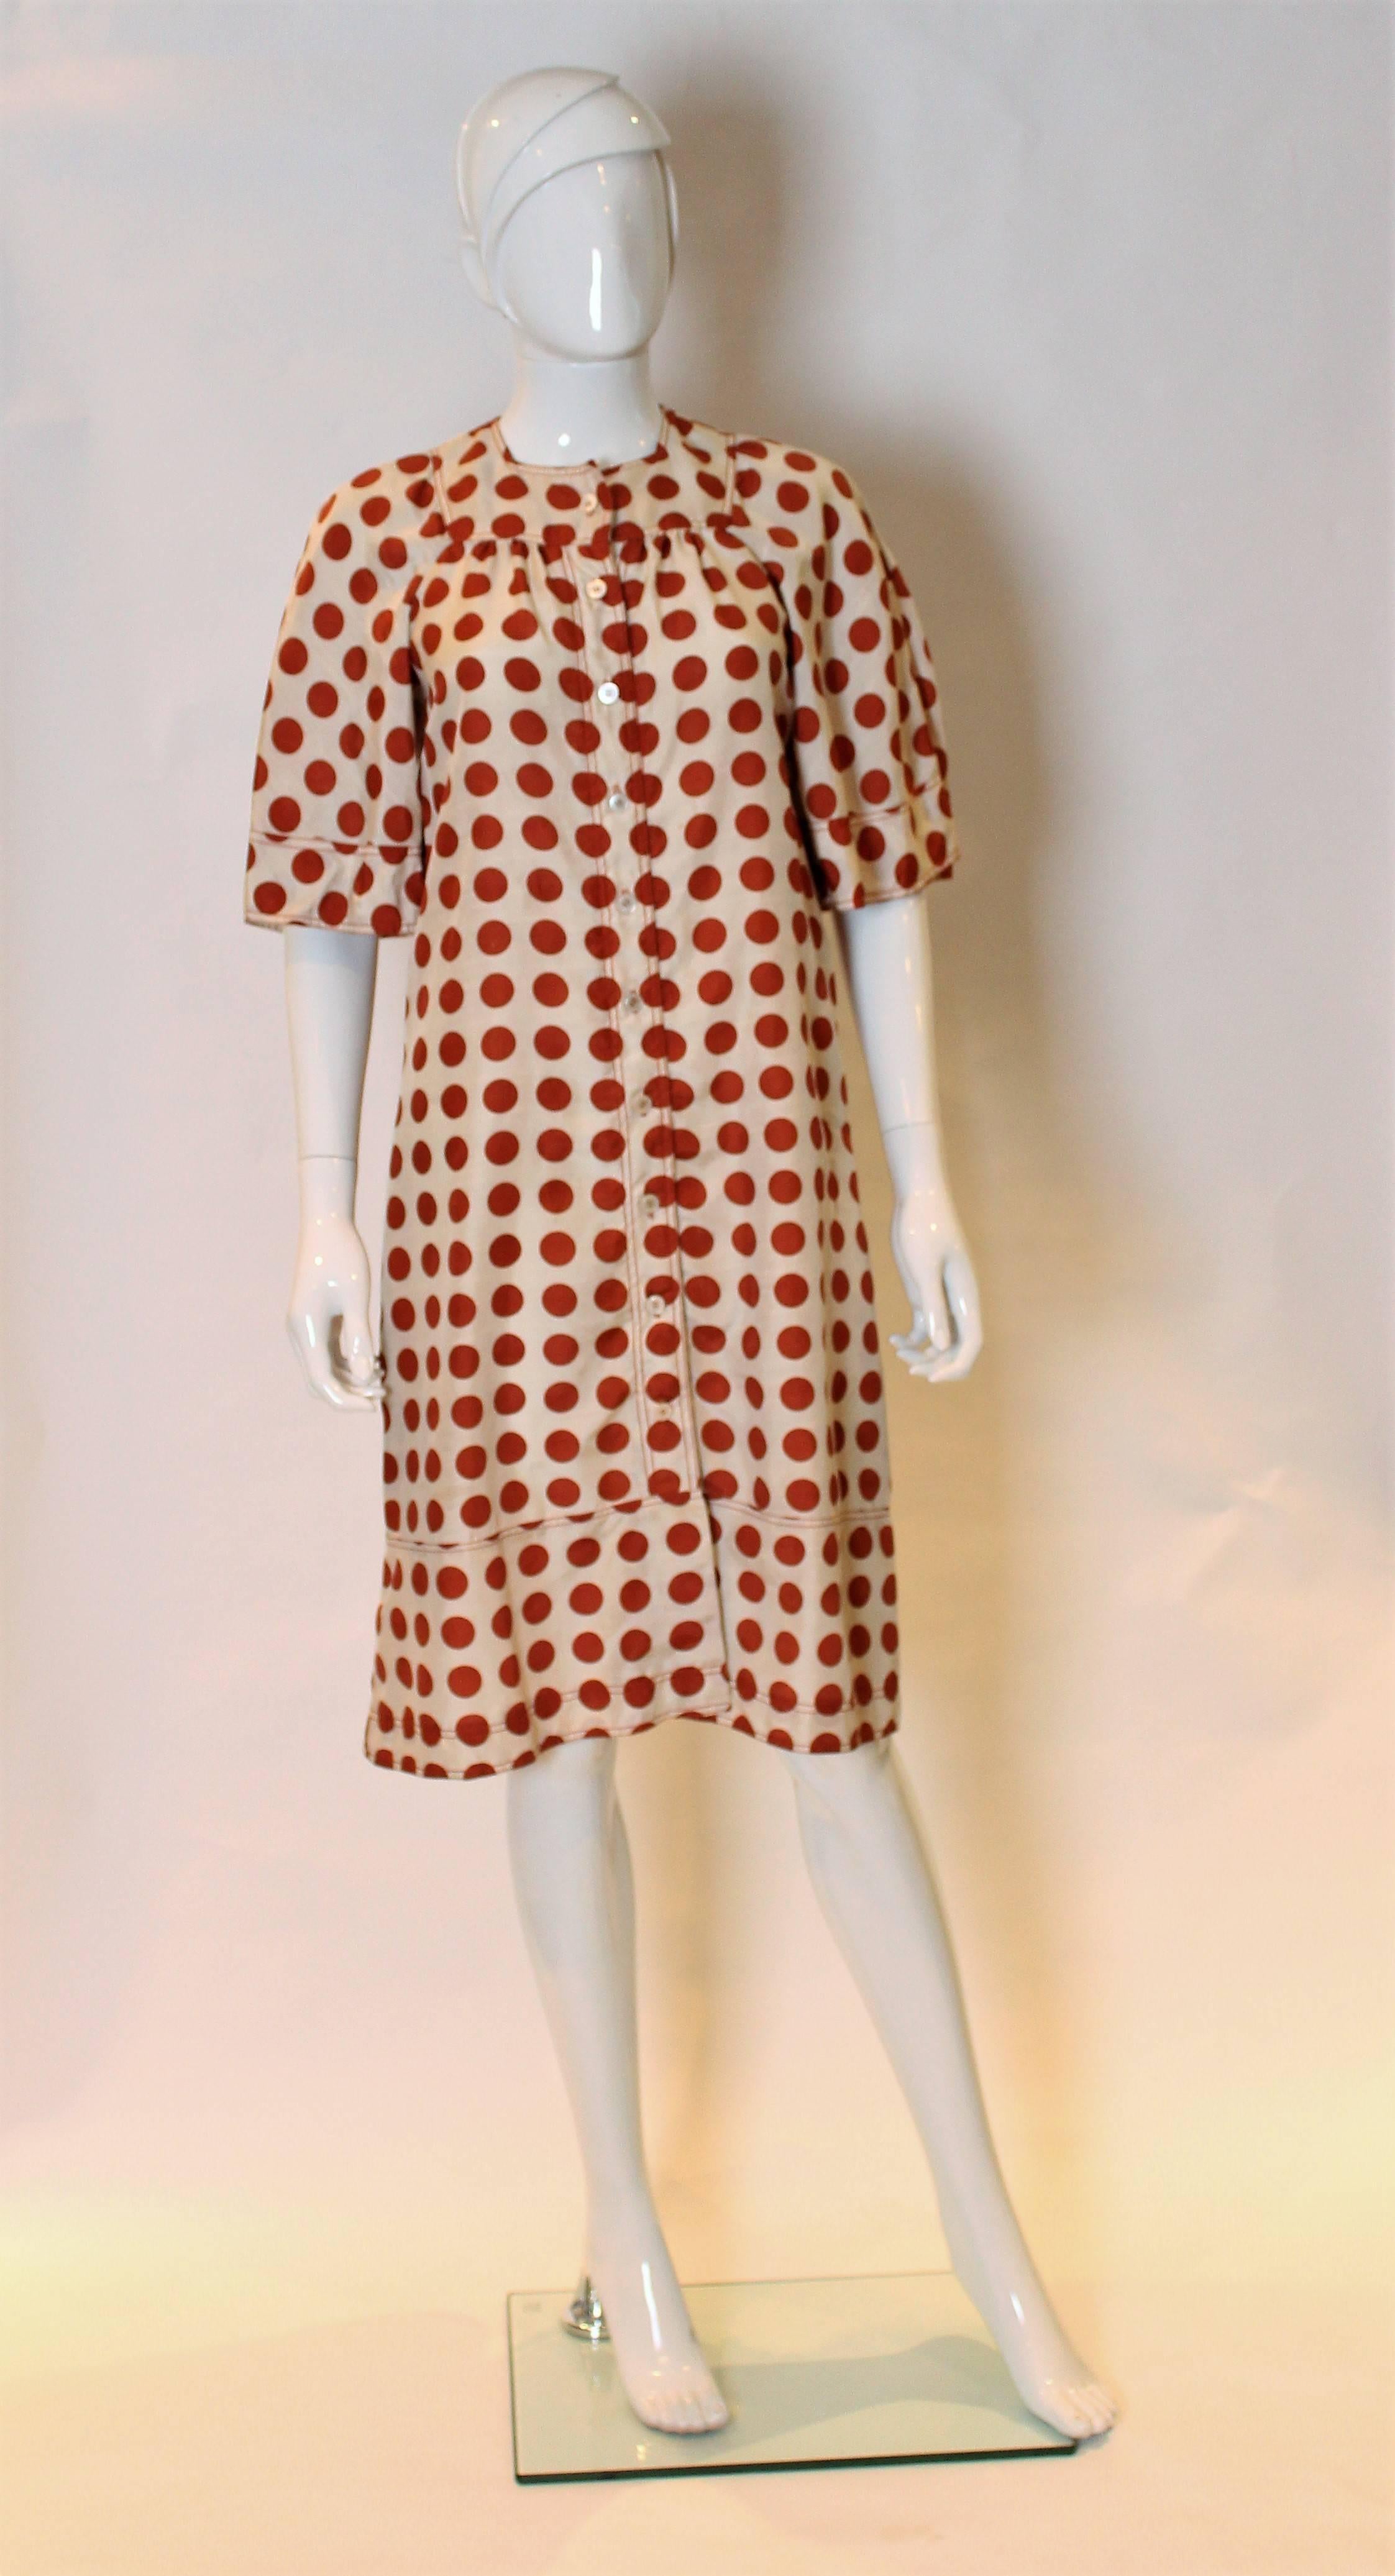 A great dress by Jean Muir, made for Harrods , London. The dress is made of sik and has an ivory background with brown spots. It has short angel like sleeves, a button through front, and is slightly flared at the hem. There are belt loops,but these